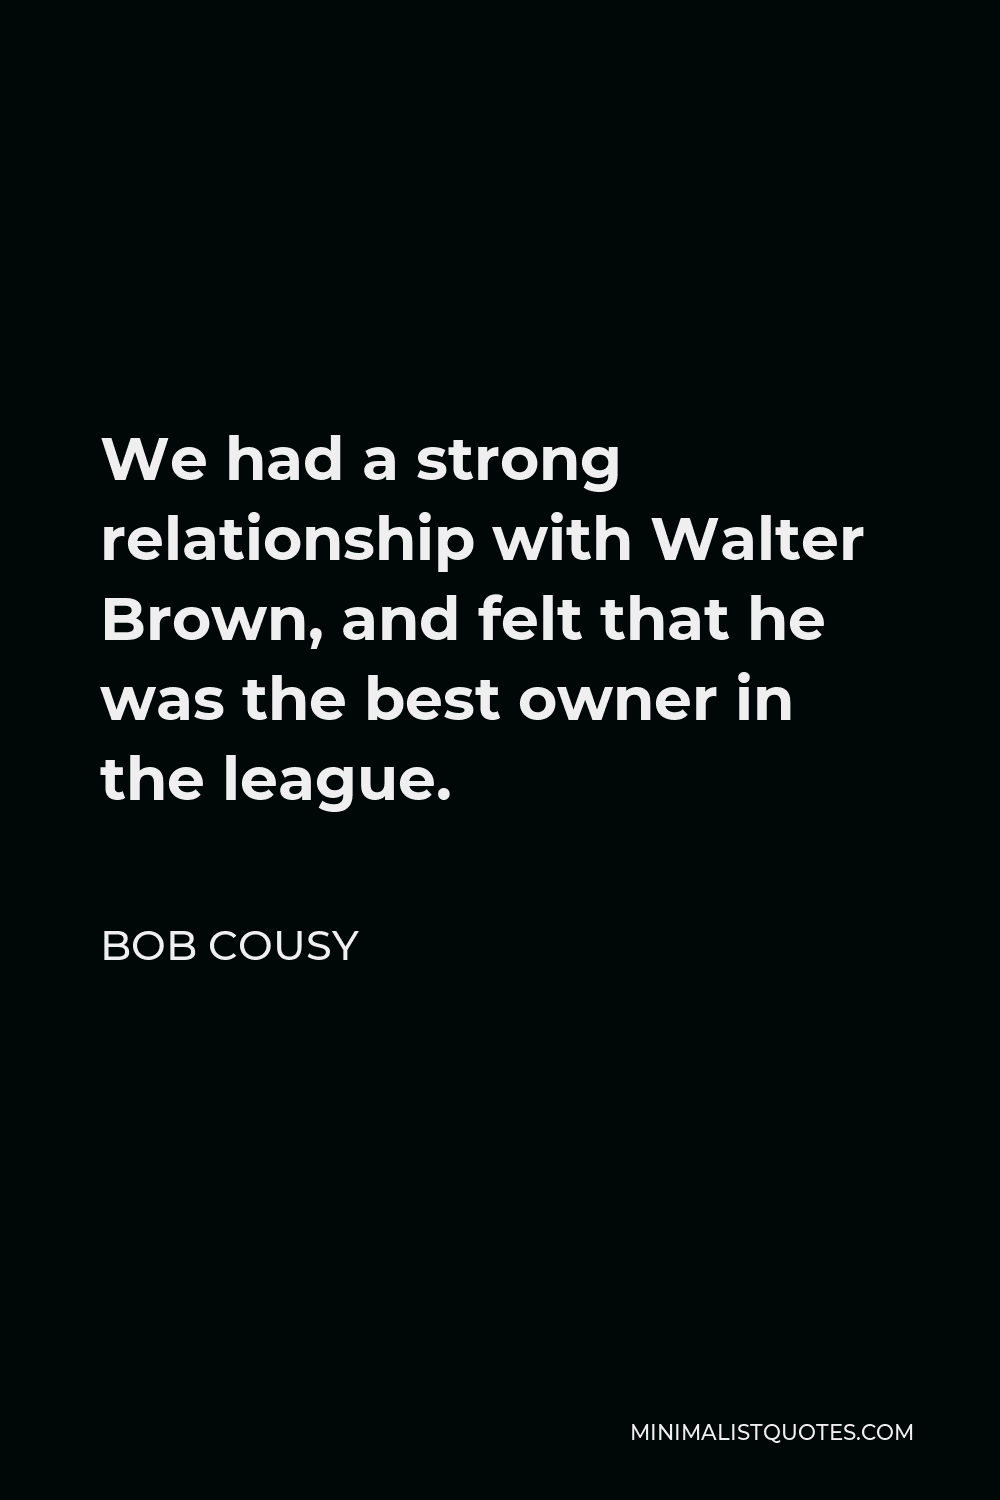 Bob Cousy Quote - We had a strong relationship with Walter Brown, and felt that he was the best owner in the league.